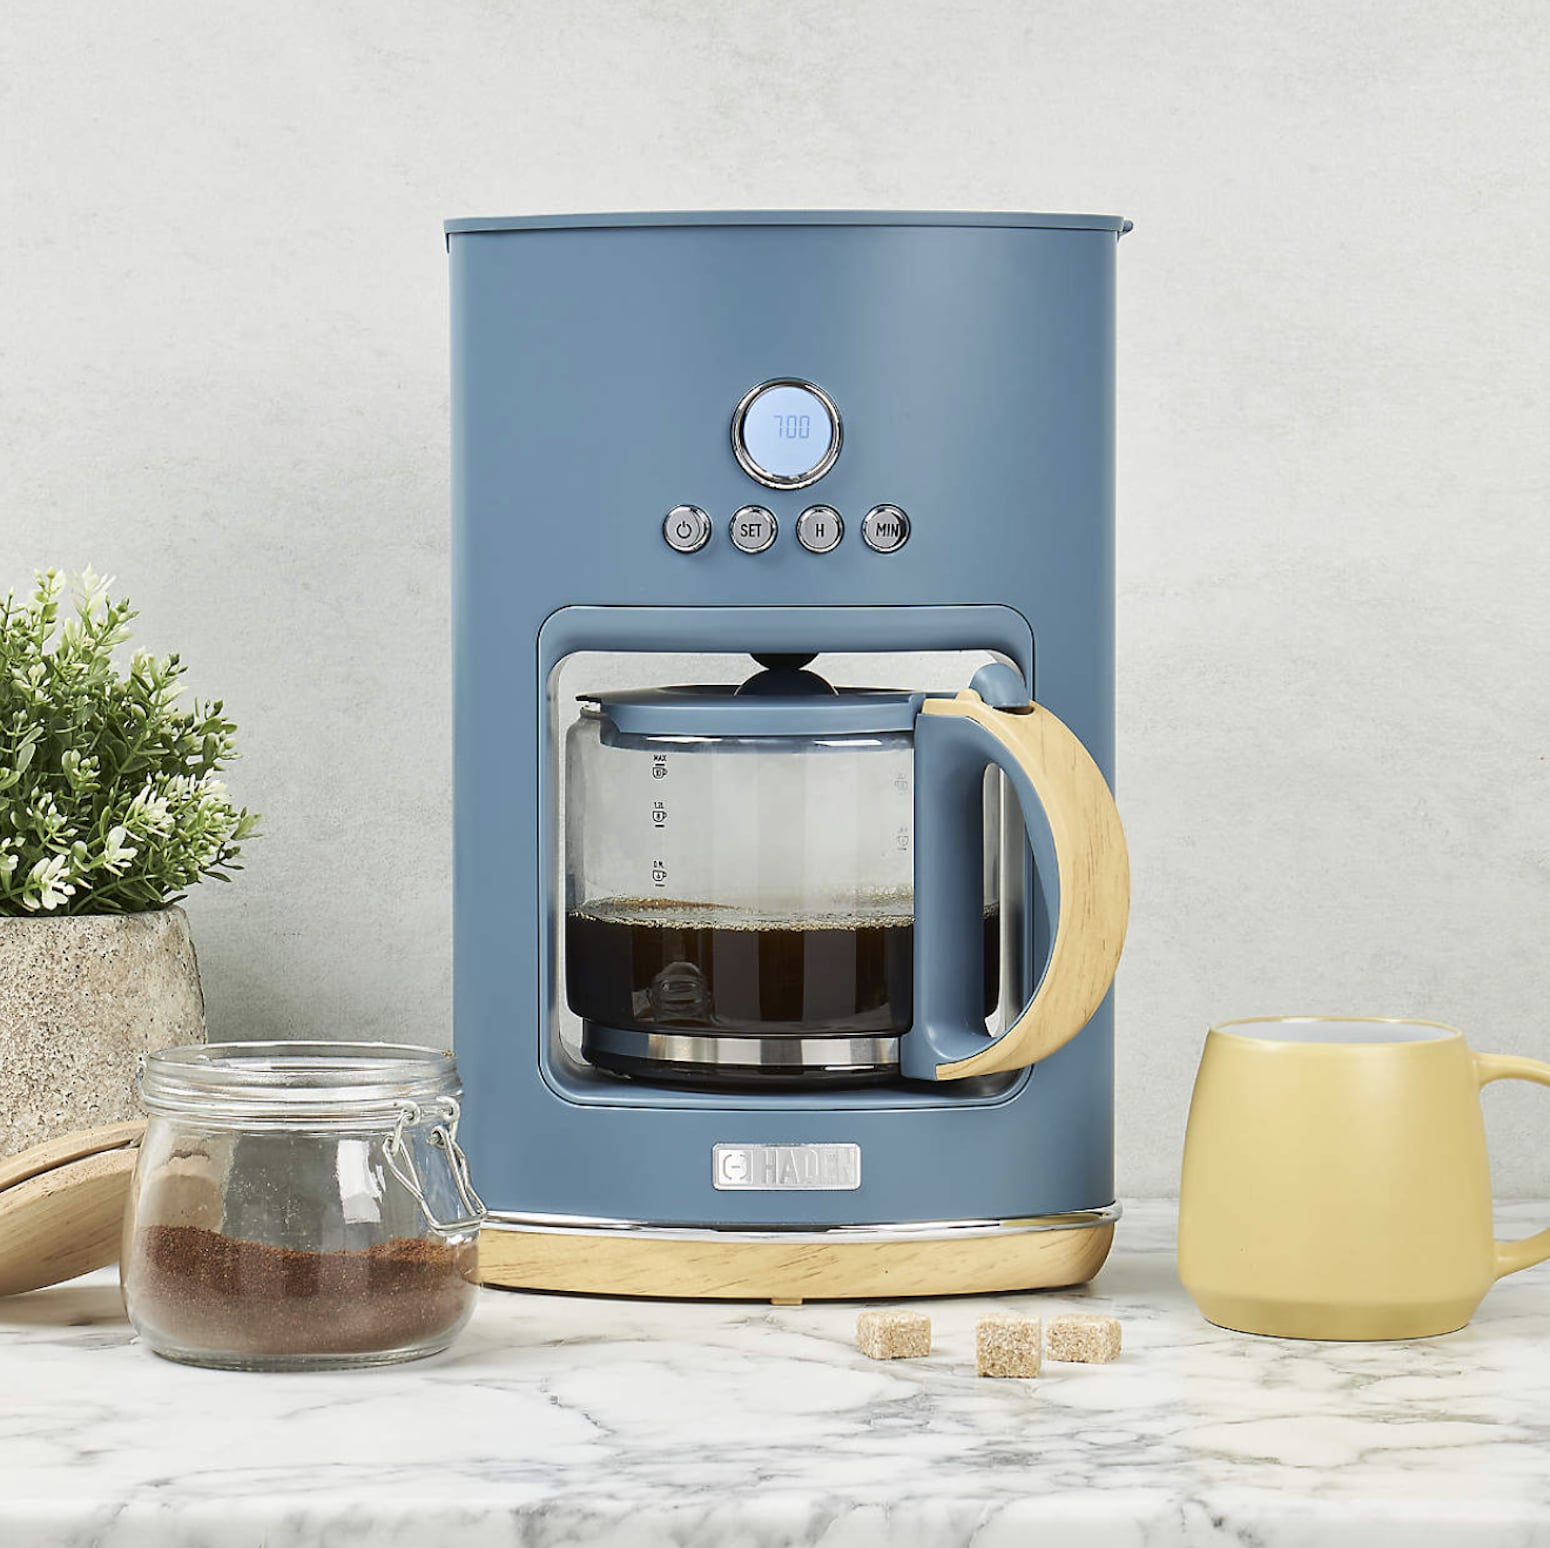 Jennifer Aniston's Coffee Maker Is This Cuisinart Beauty - PEOPLE.com